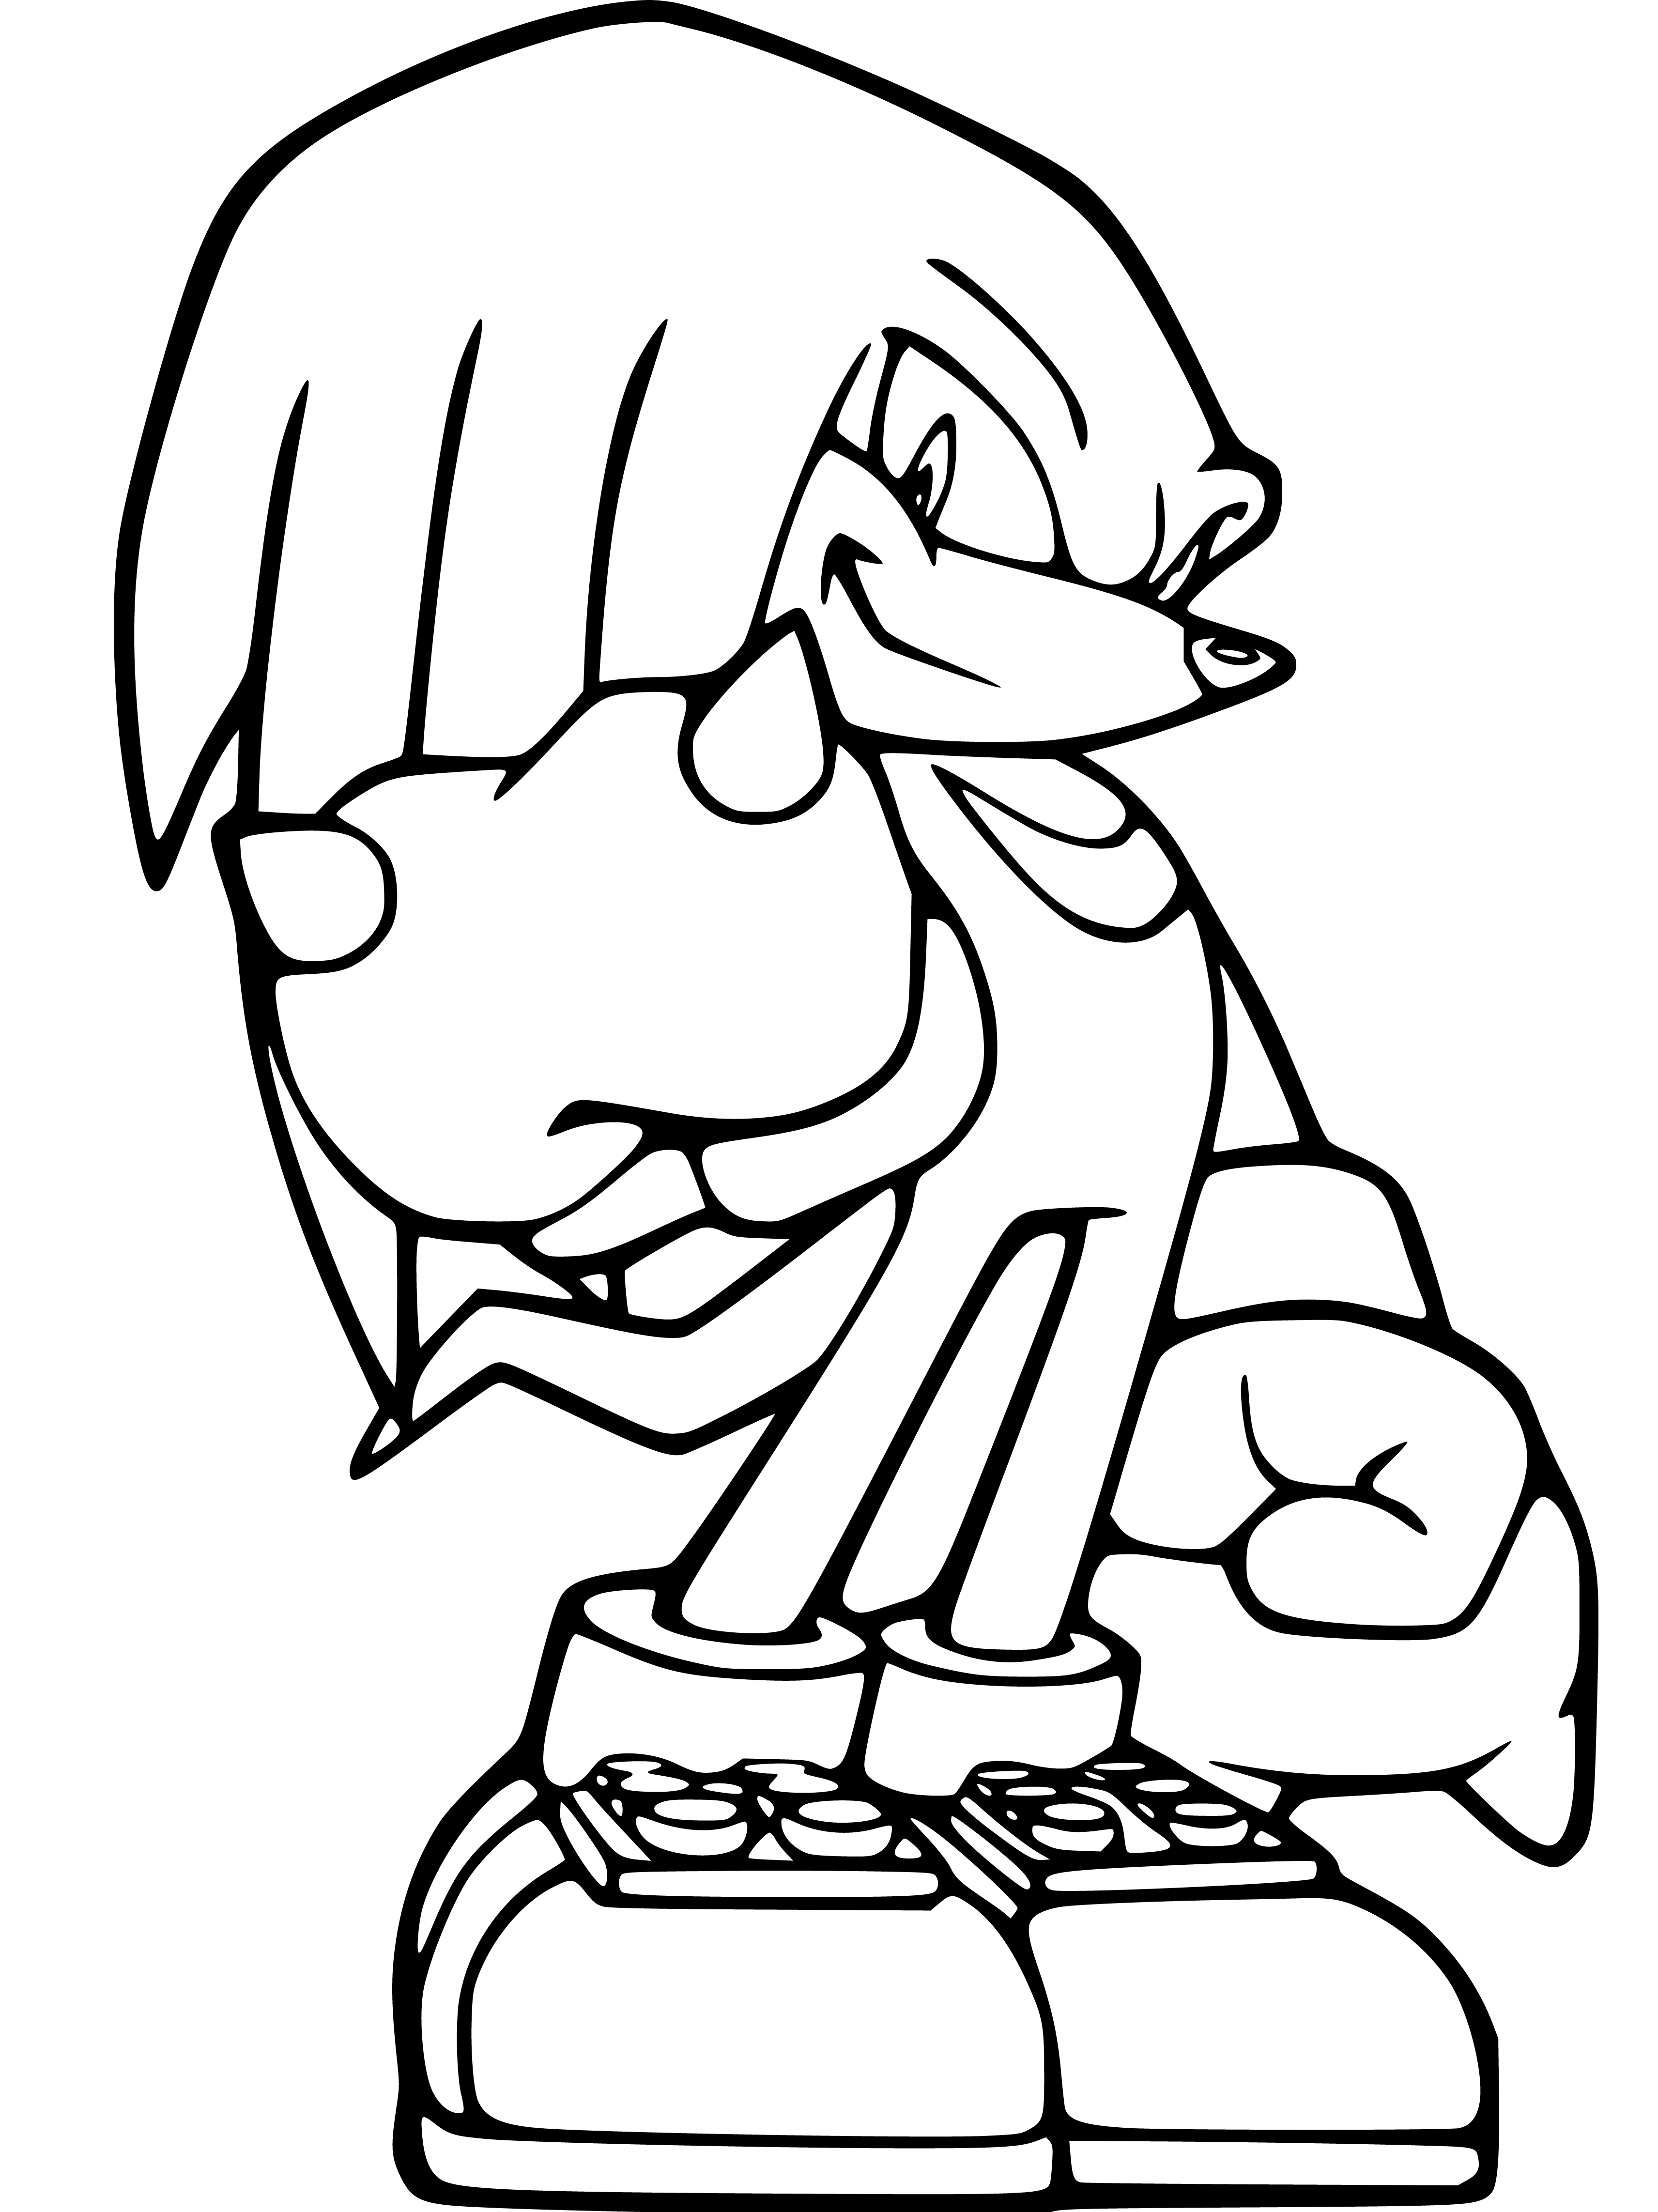 Knuckles the Echidna Coloring Page for Kids (Sonic) - SheetalColor.com